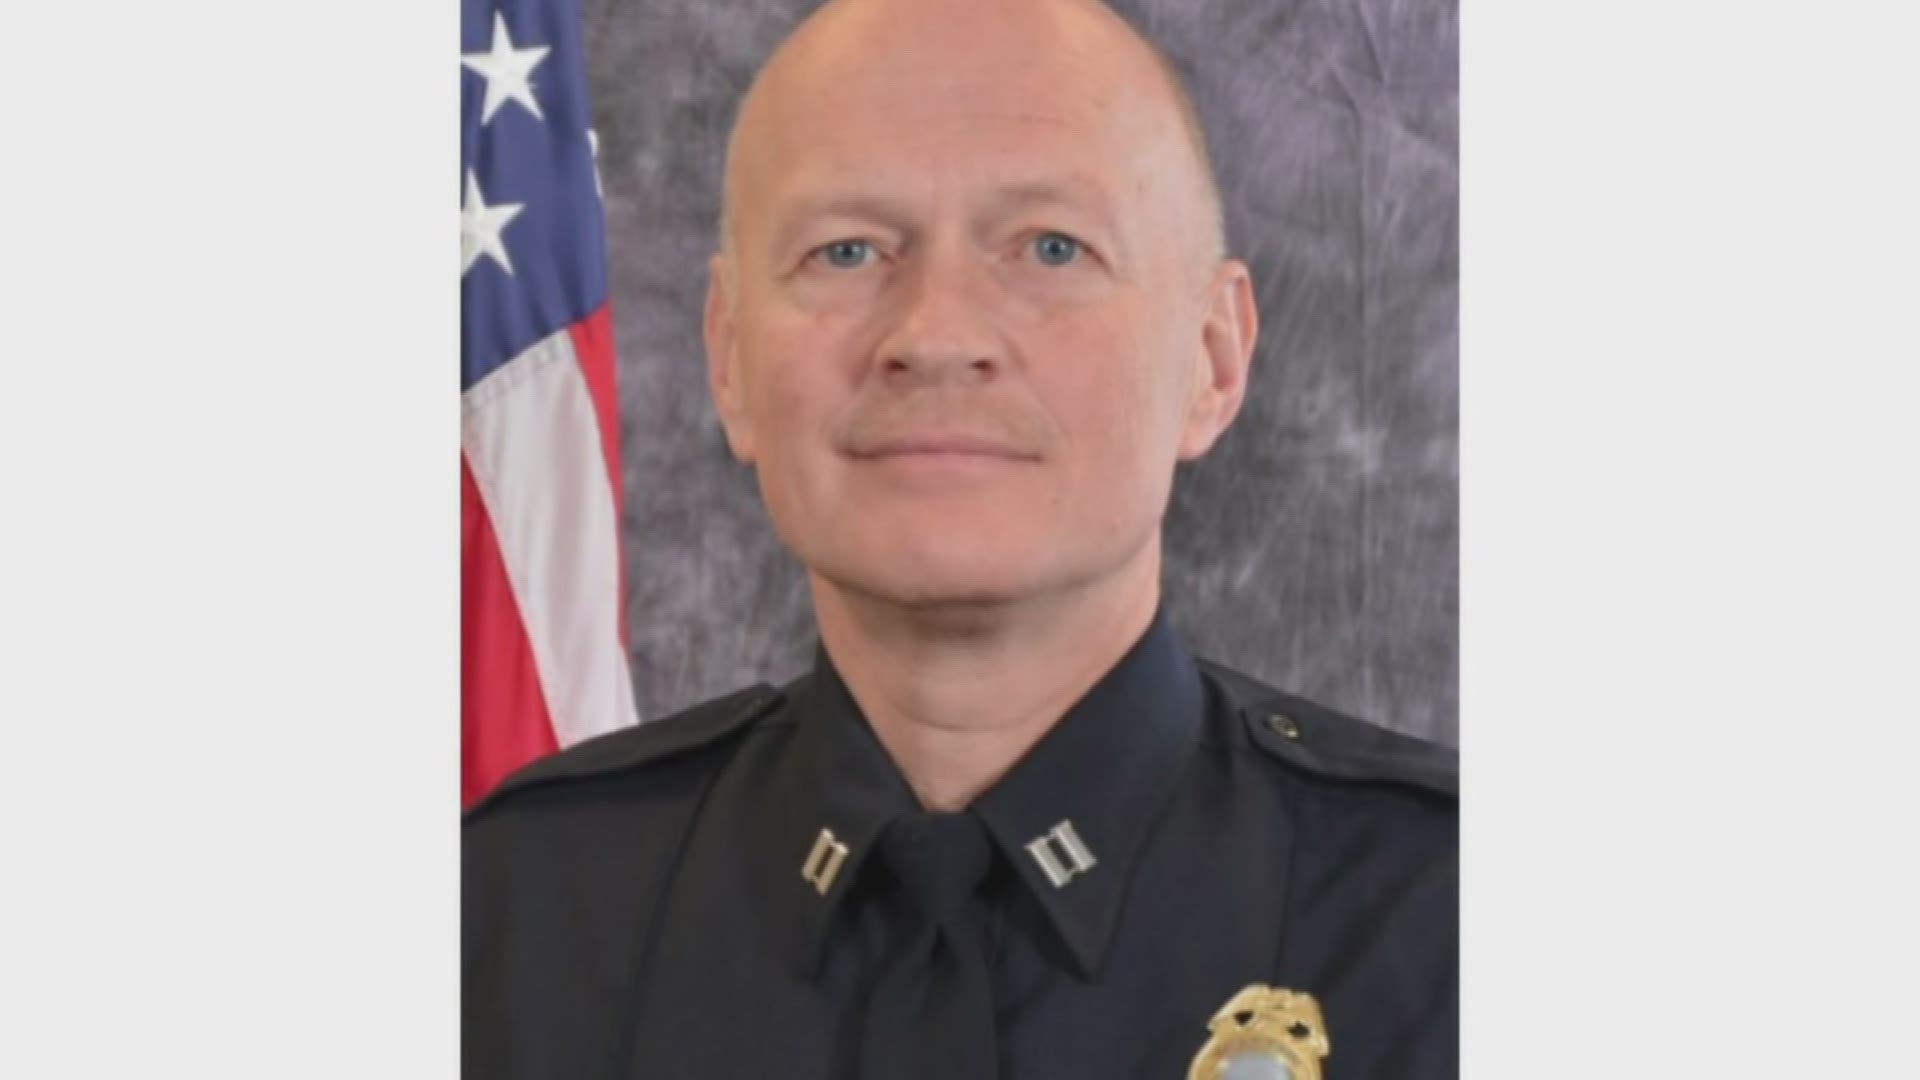 Grand Rapids Police Captain to be reinstated following internal investigation